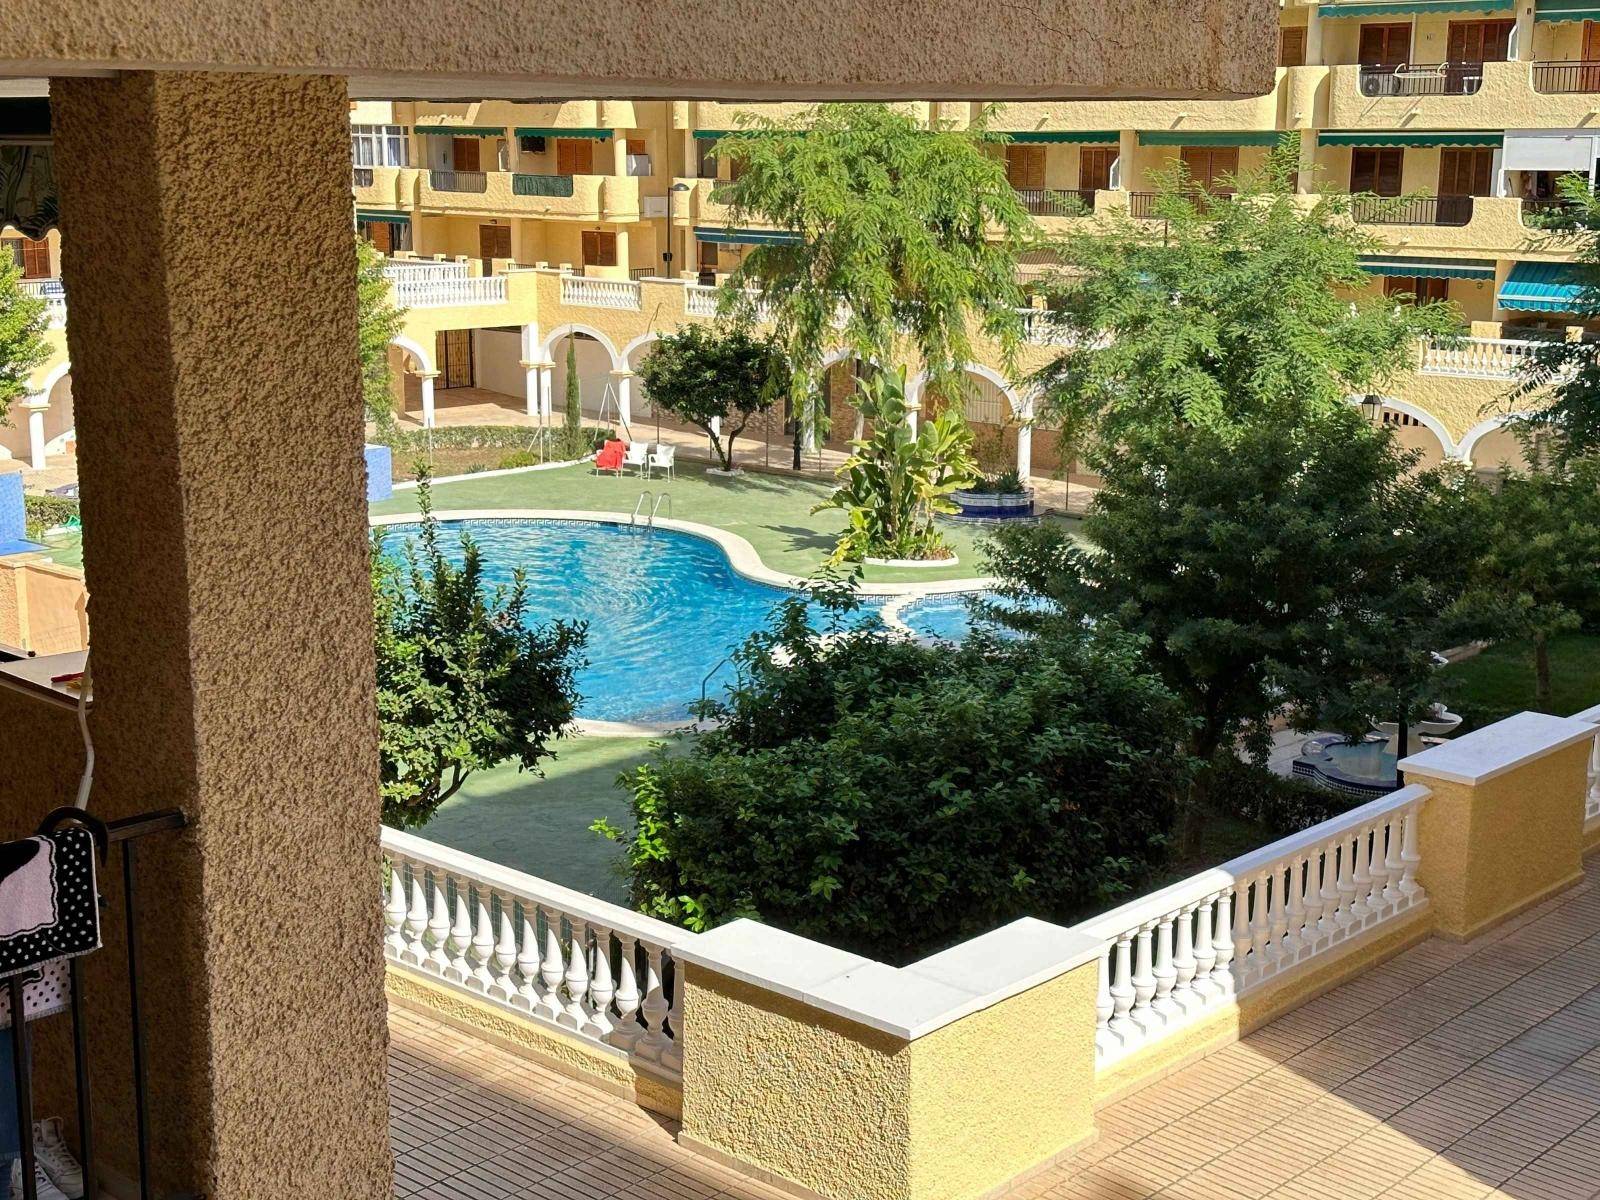 BEAUTIFUL APARTMENT IN LA MATA WITH LARGE GARAGE AND CLOSE TO THE SEA